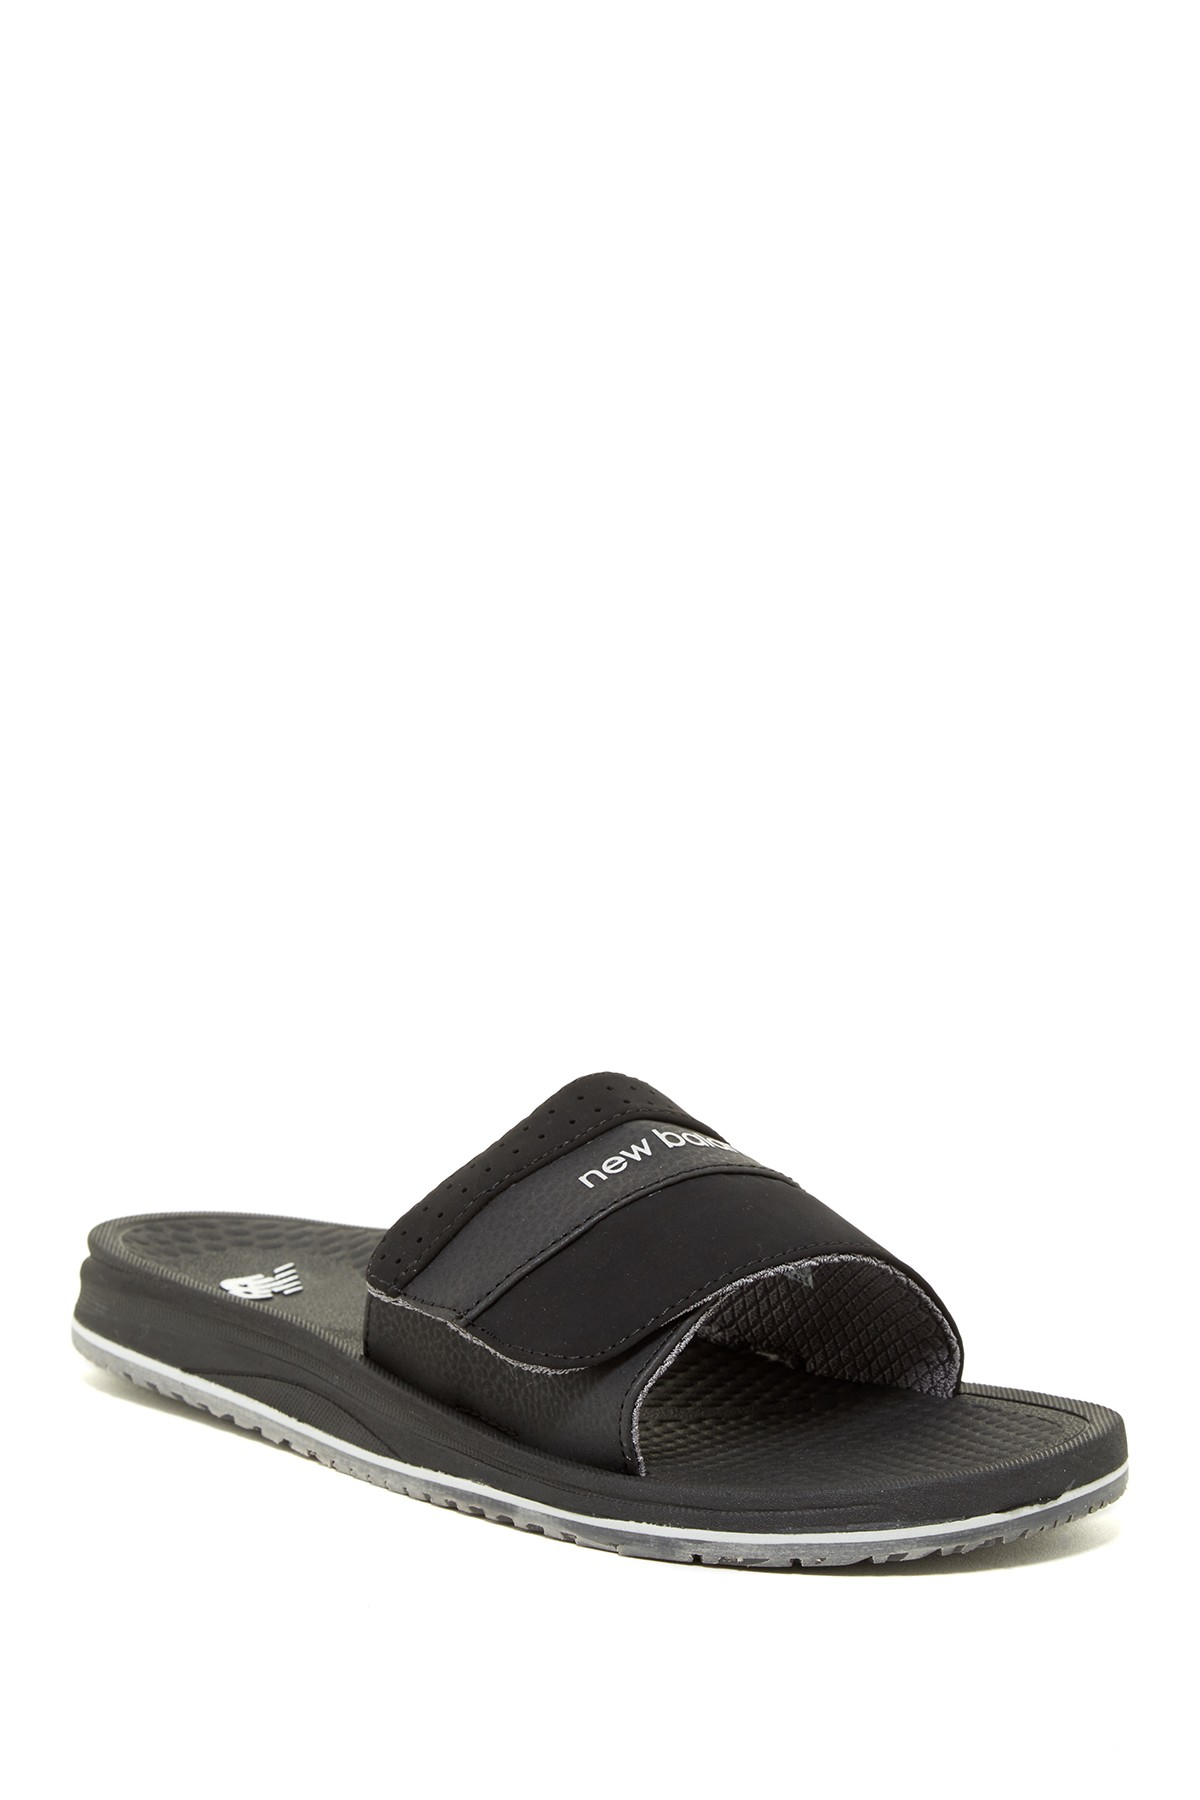 New balance Purealign Slide Sandal - Wide Width Available in Black for ...